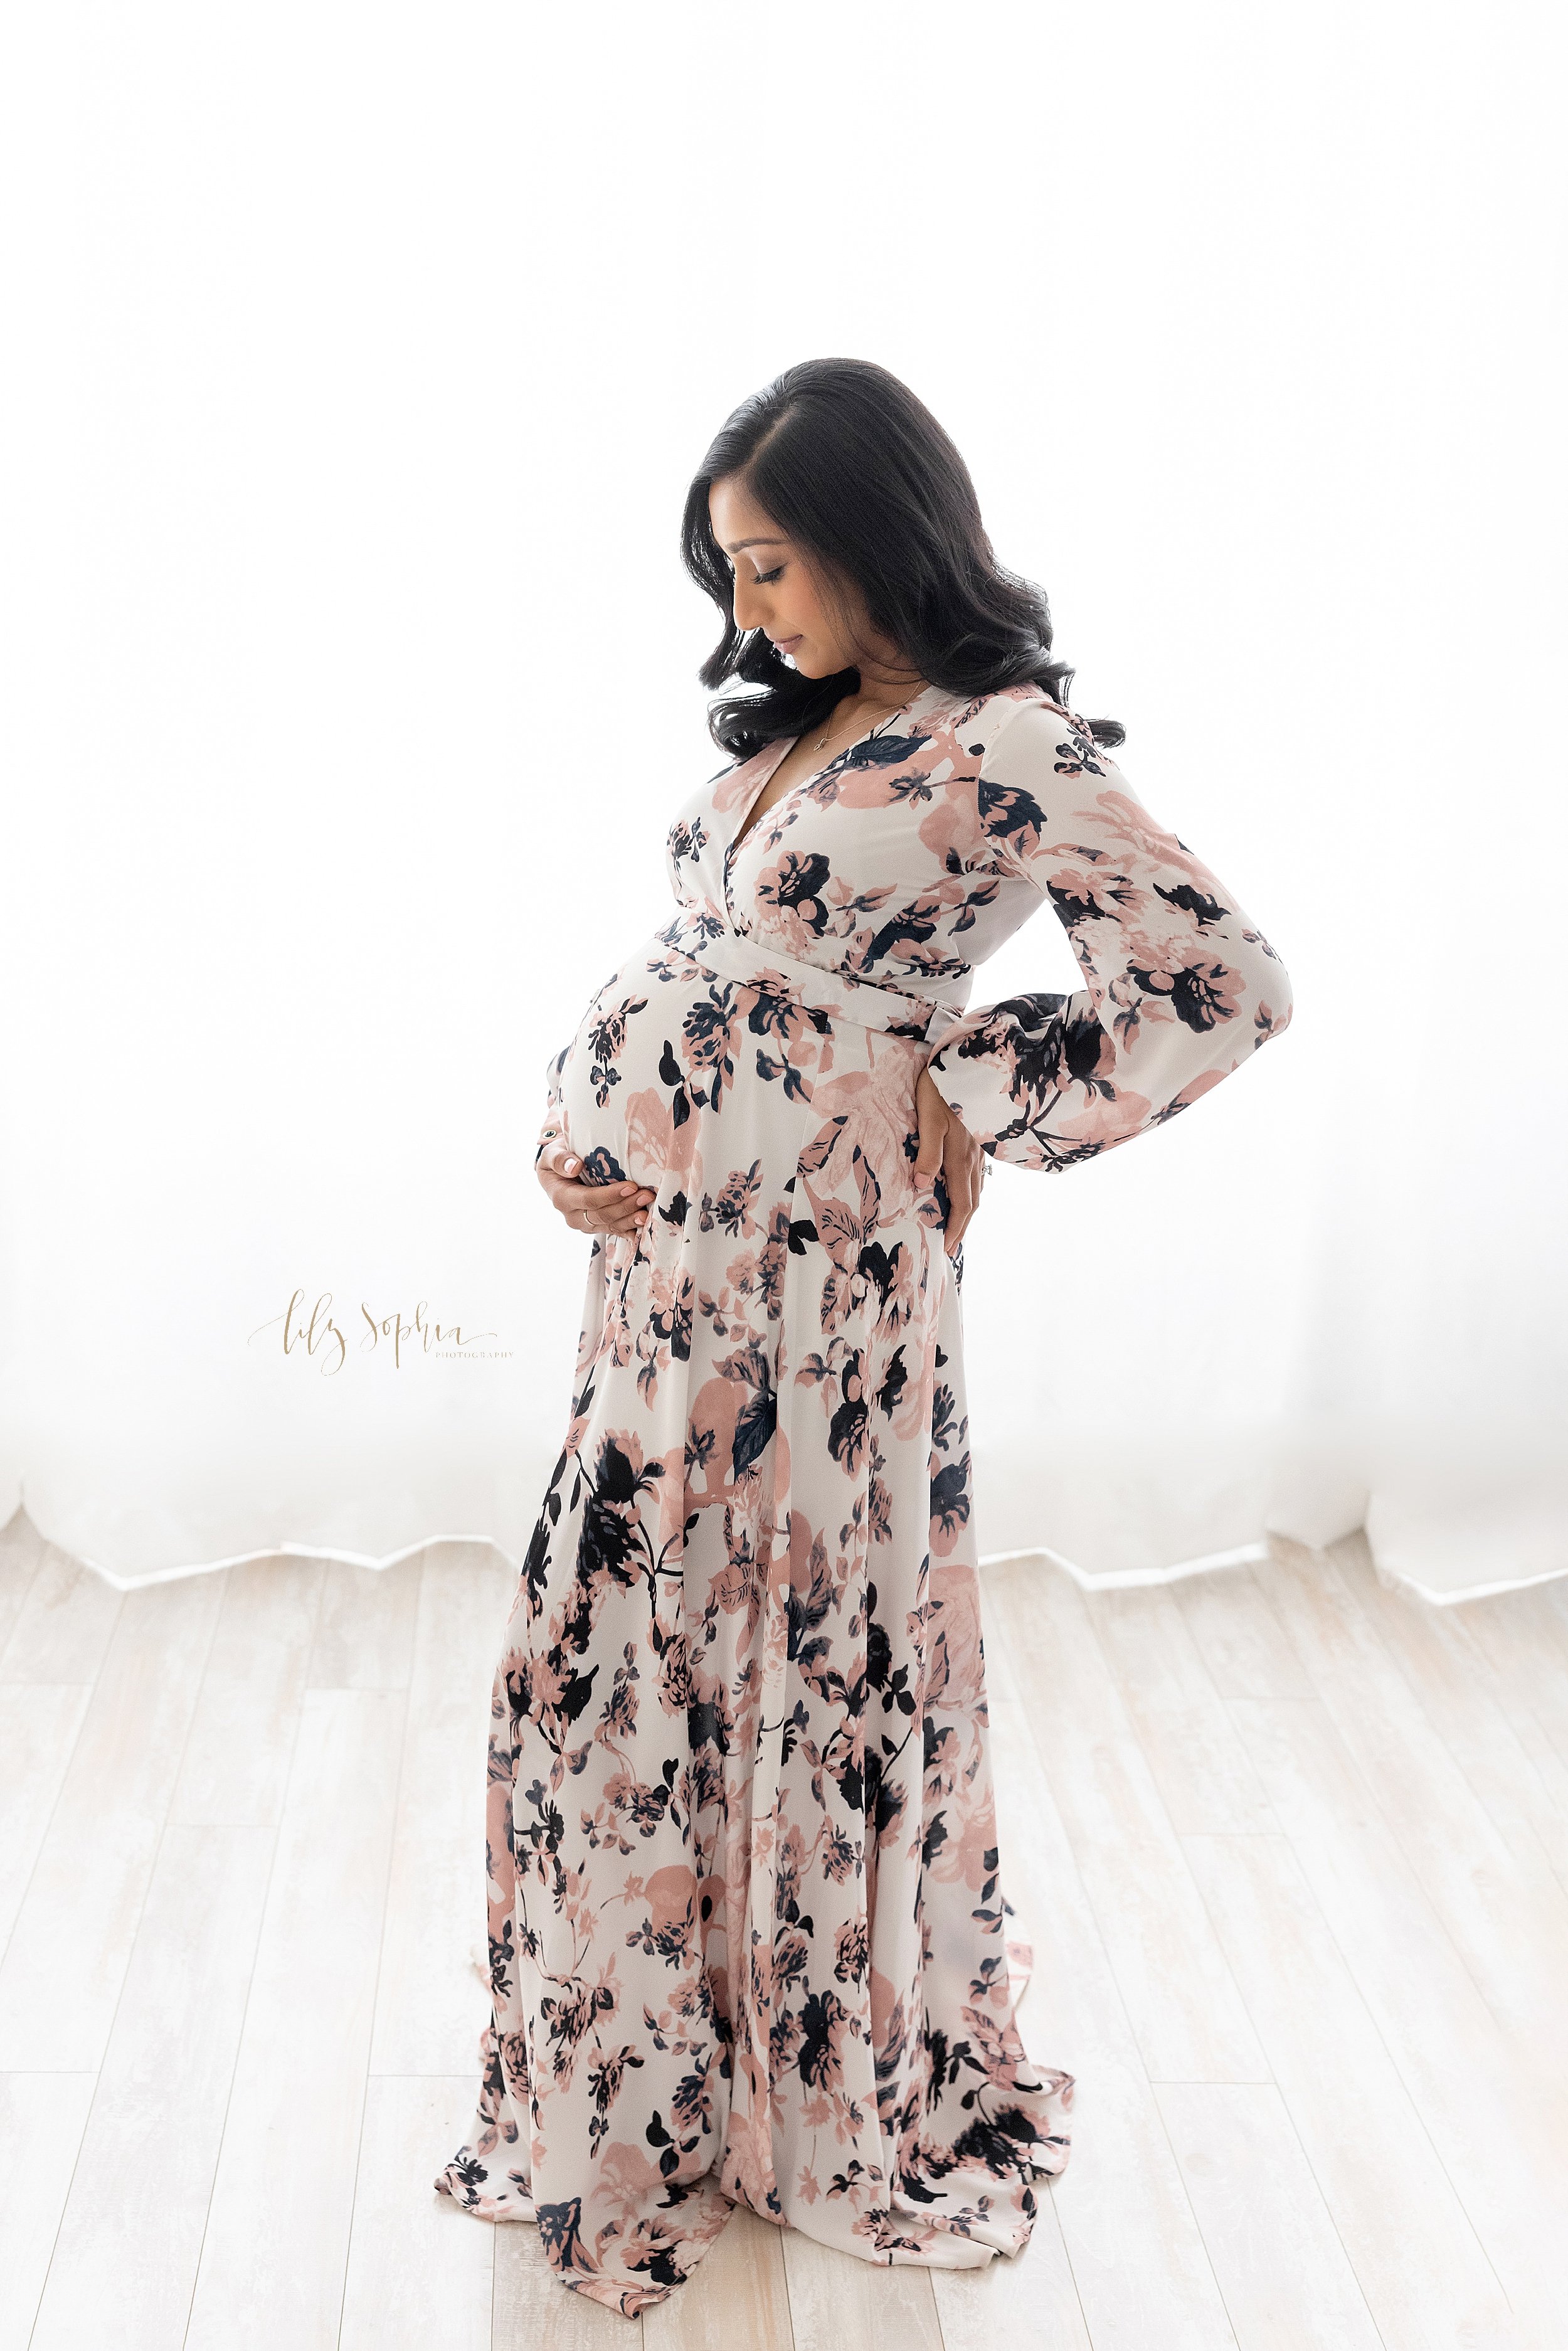  Maternity portrait of an Indian pregnant mother as she stands in front of a window streaming natural light wearing a floral long sleeve full-length gown with her right hand holding her belly and her left hand on her hip as she contemplates the upcom